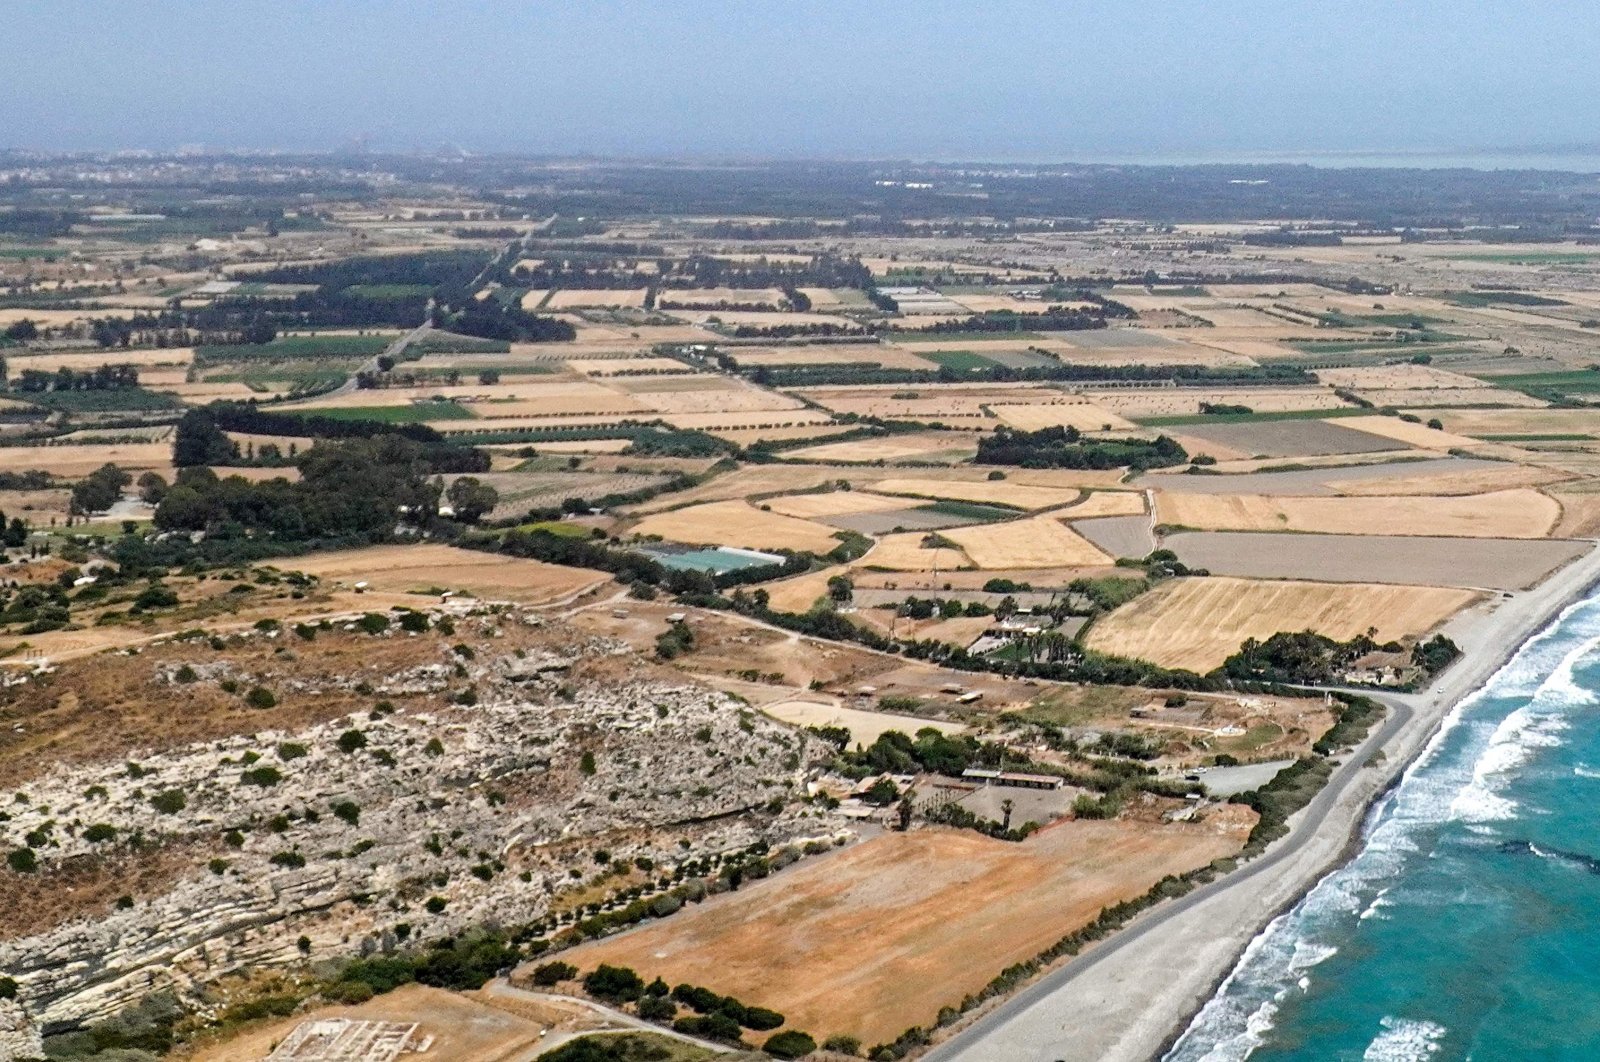 An aerial view of the ancient site of Kourion along Episkopi bay at the Akrotiri British military sovereign base area (SBA) west of Limassol, Greek Cyprus administration, May 24, 2022. (AFP Photo)